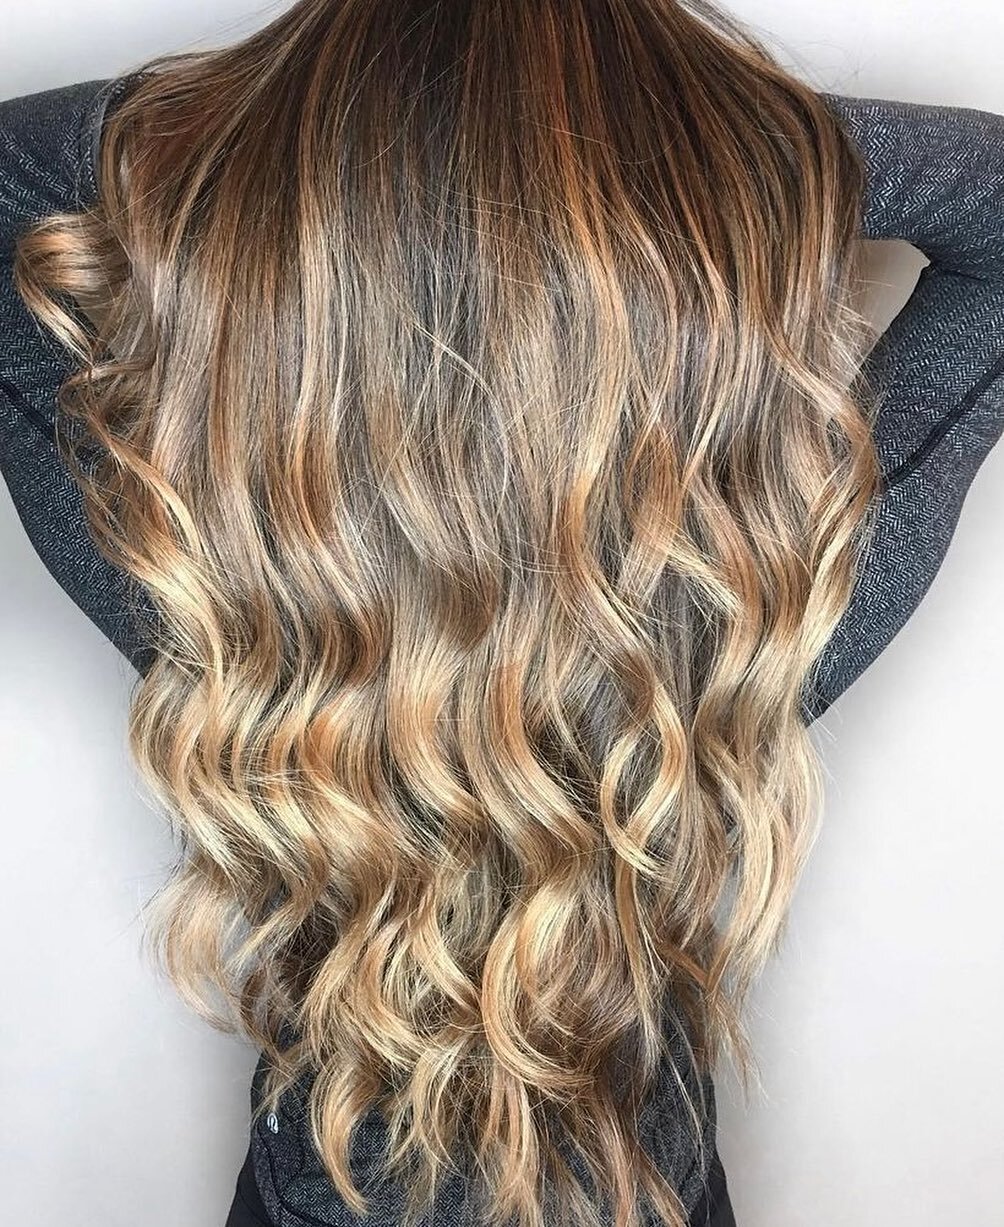 How many different color blends did we use for this look? A lady never tells but I will say the magic of seamless extensions is all in the color blend and placement. This one is a dreamy blend to me! Comment below if you agree 💗 #hairextensions #con